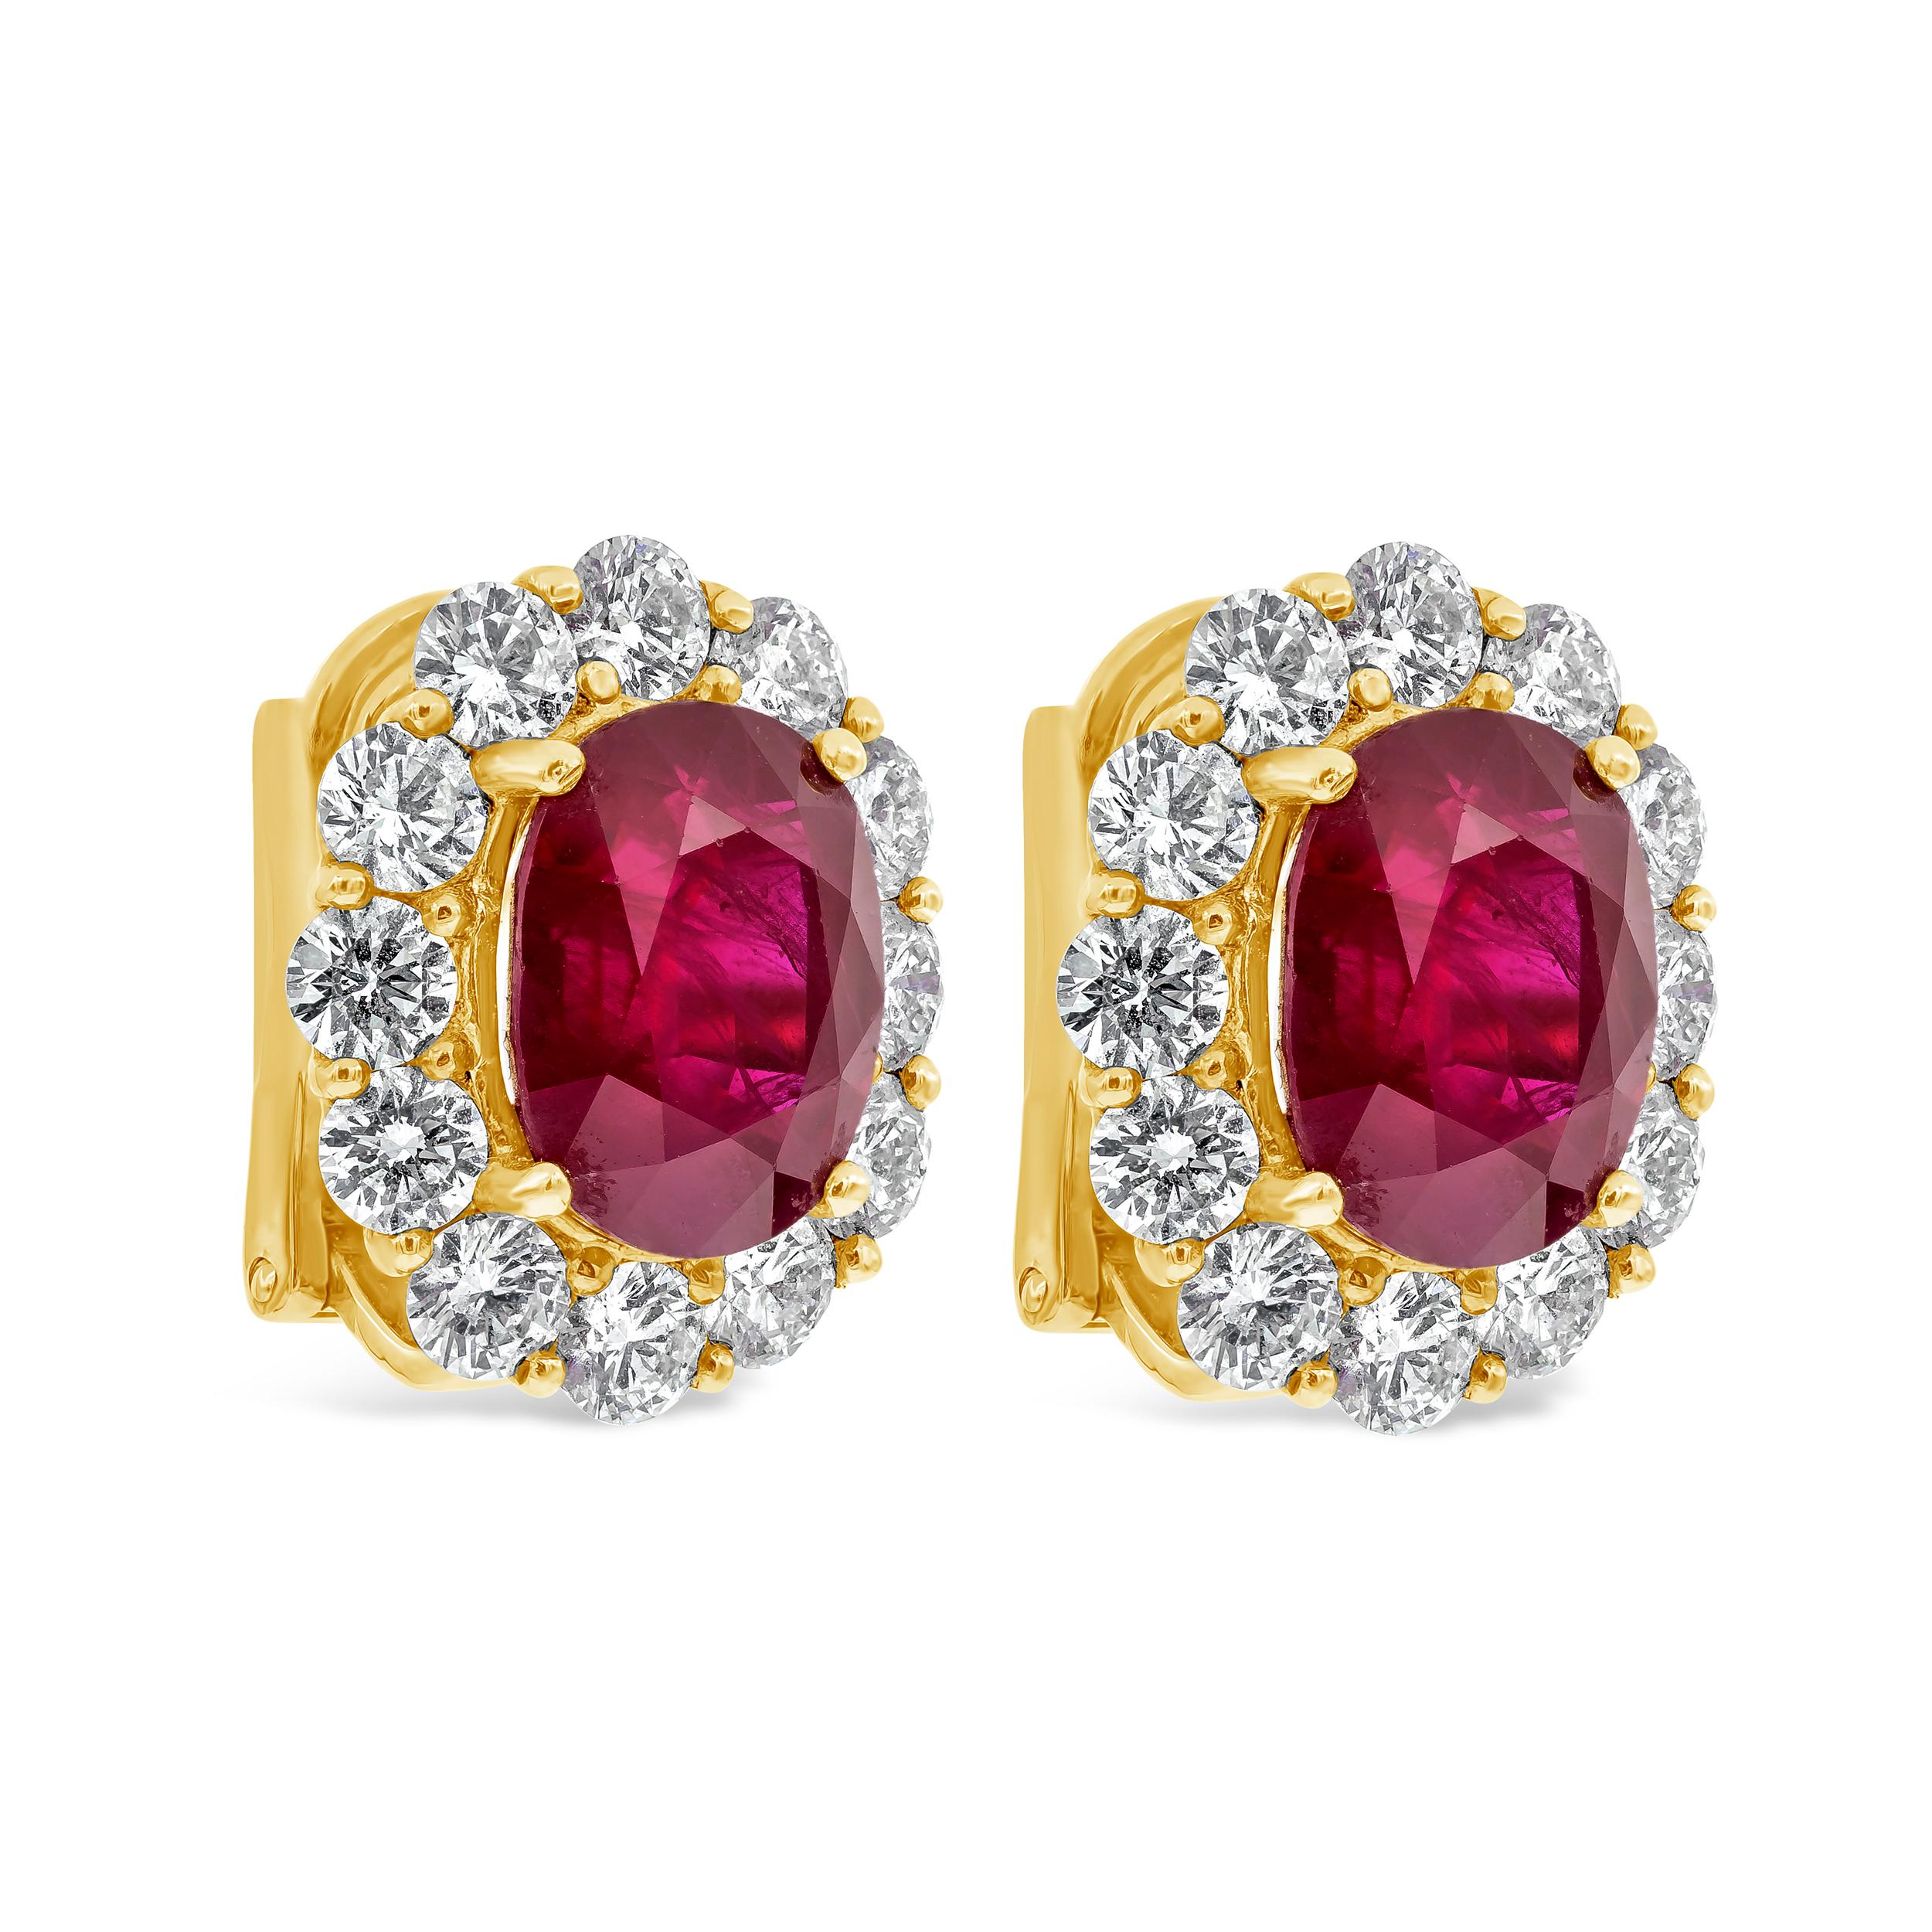 A pleasing pair of gemstone earrings features two color rich GIA Certified oval cut heated rubies weighing 5.69 carats total, surrounded by a single row of brilliant round diamonds in a halo design weighing 2.14 carats total. Made in 18K Yellow